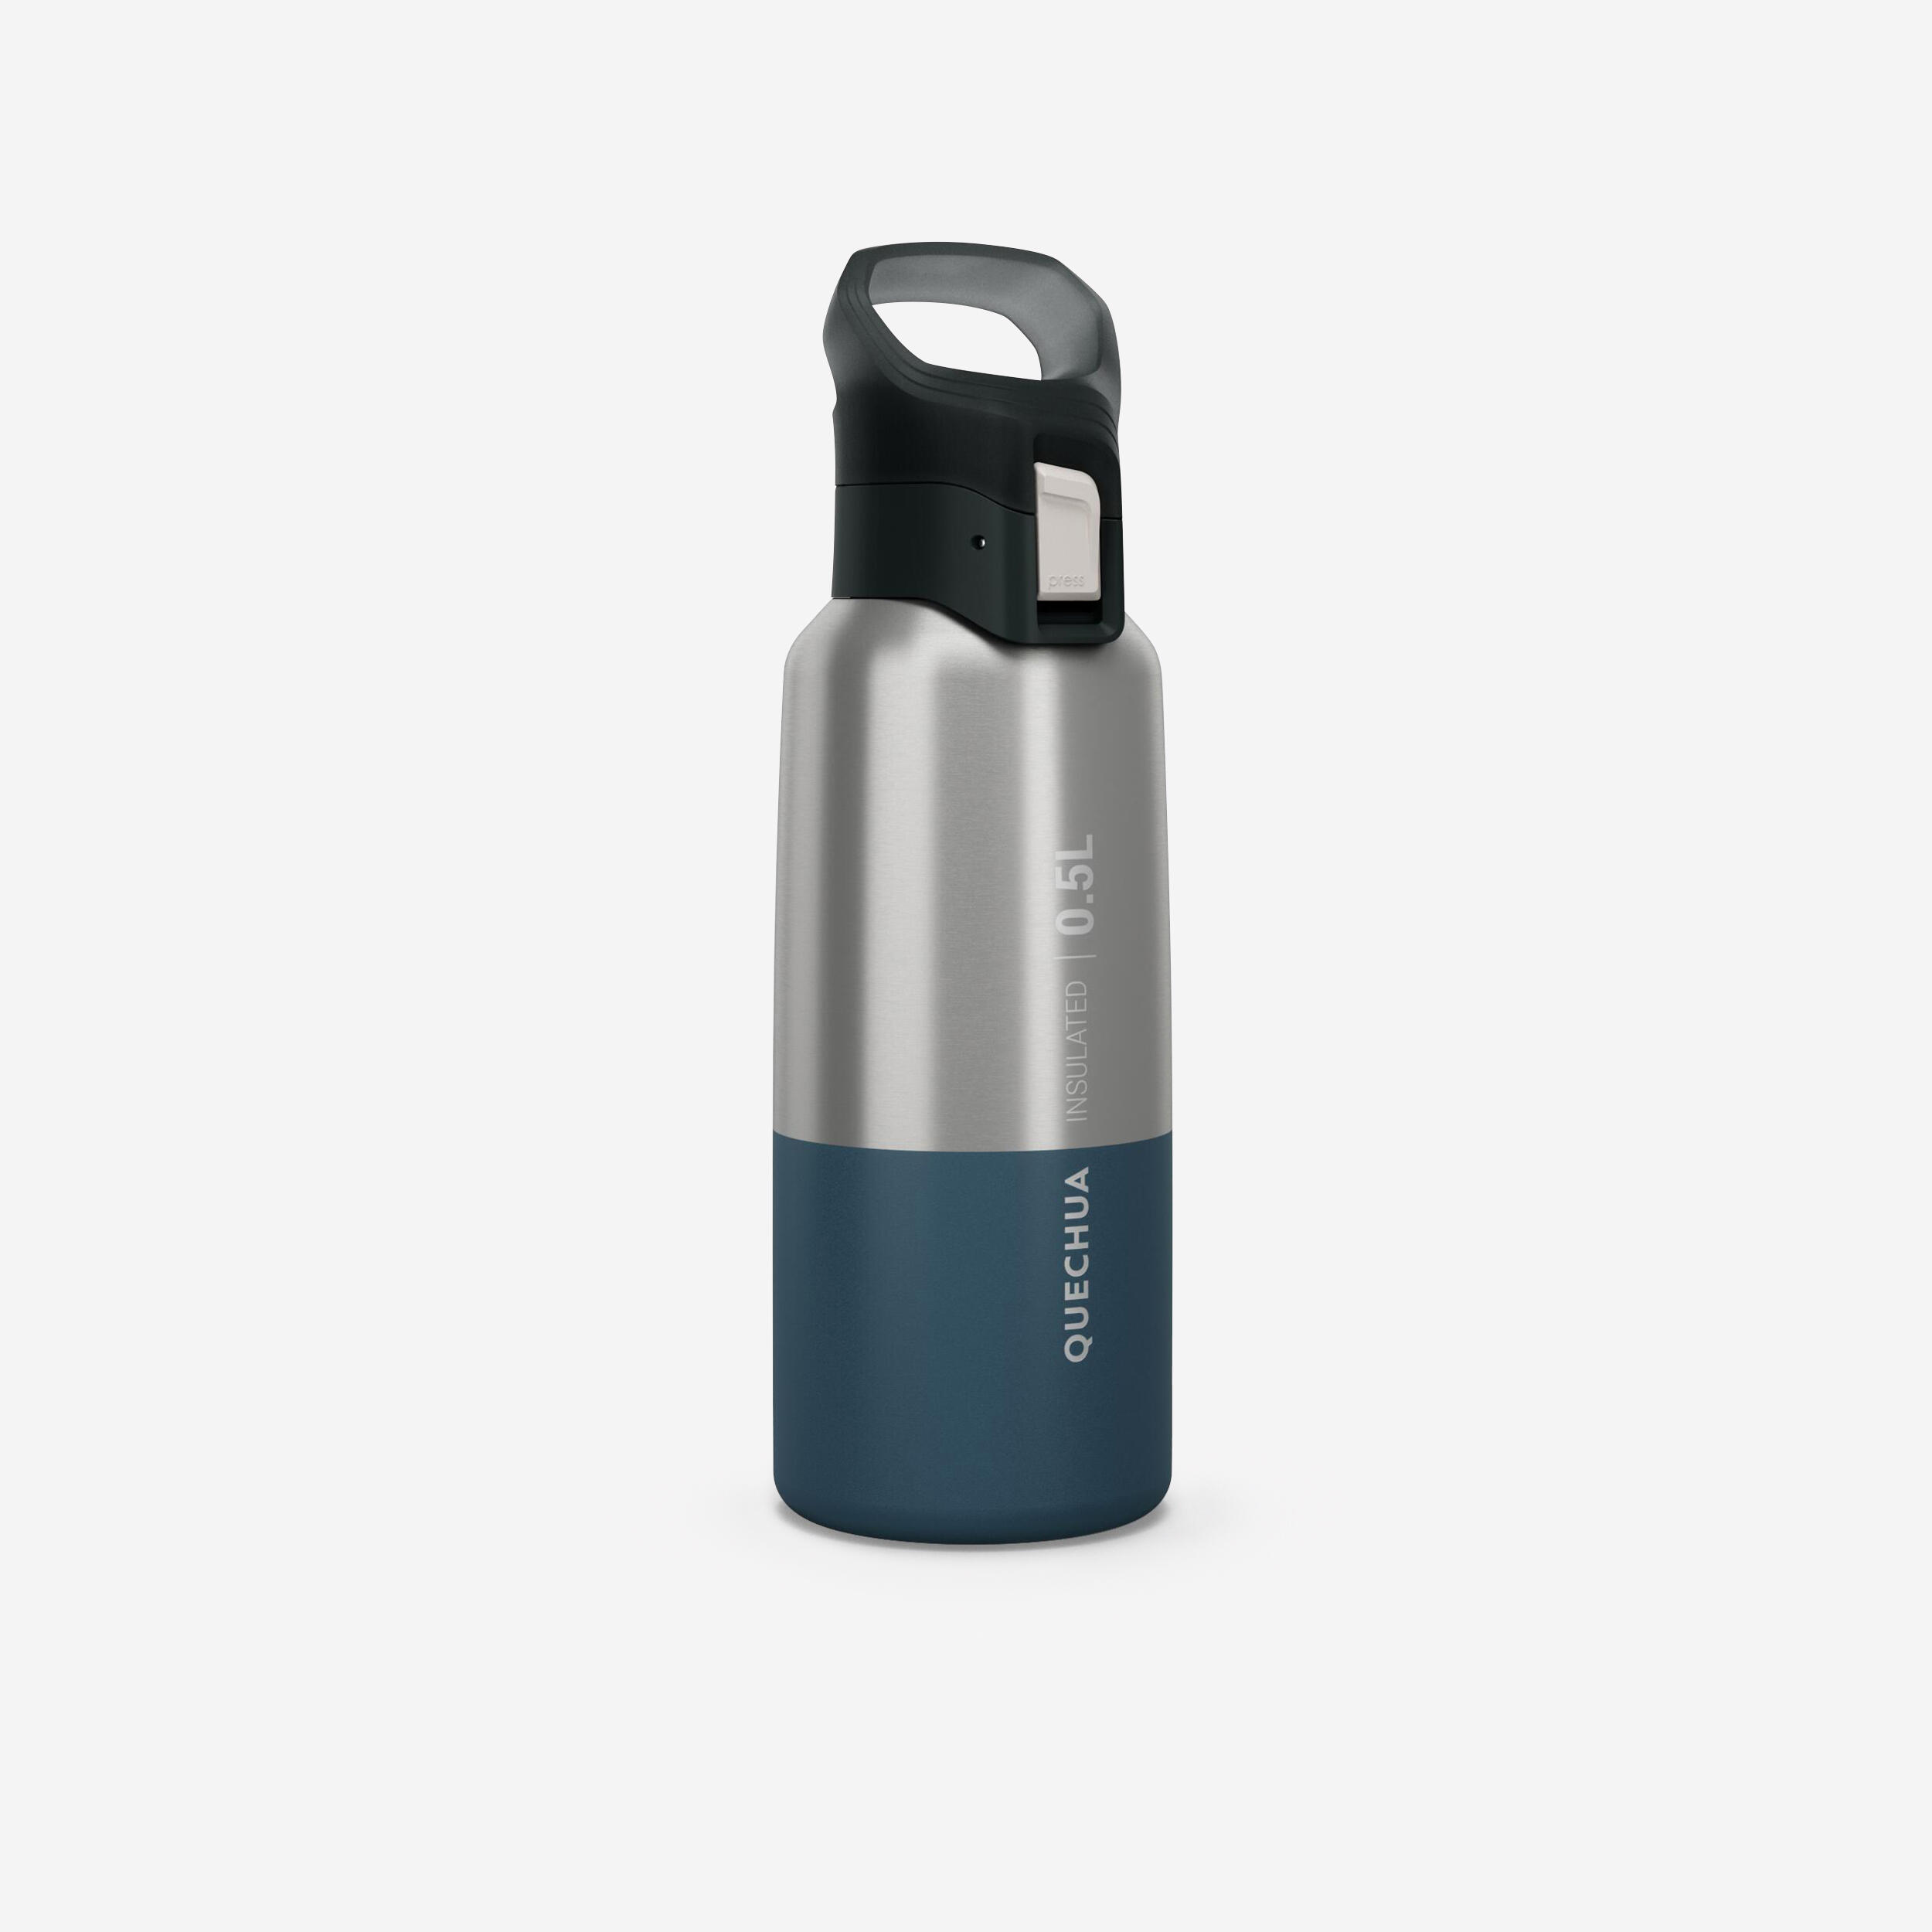 MH500 isolthermal flask 0.5 L - QUECHUA